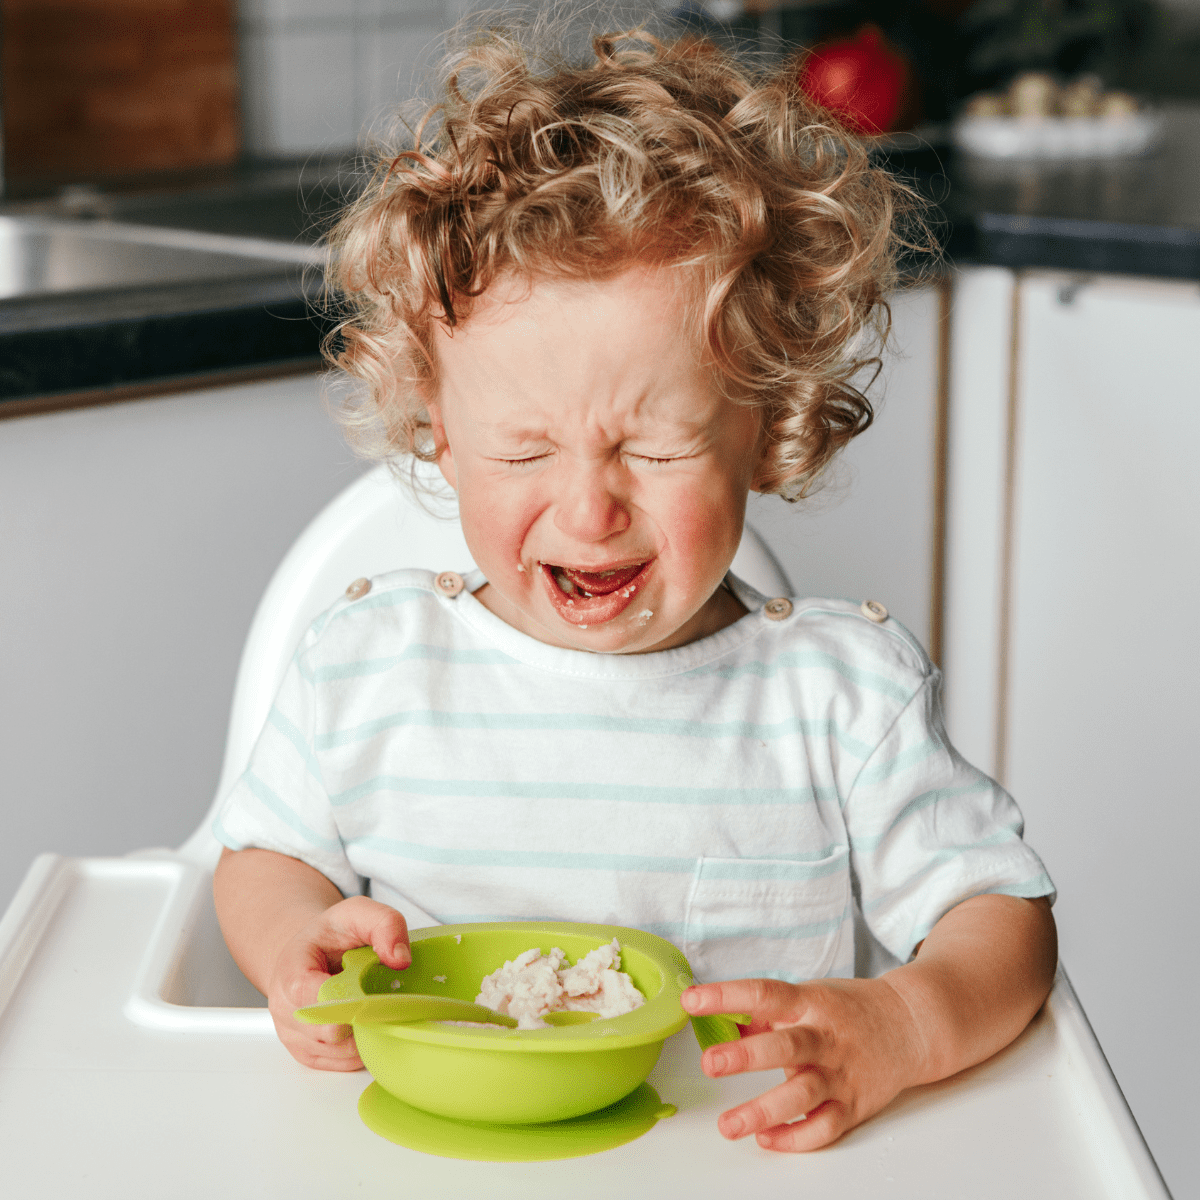 Help! My 2-Year-Old Won’t Eat Anything But Snacks